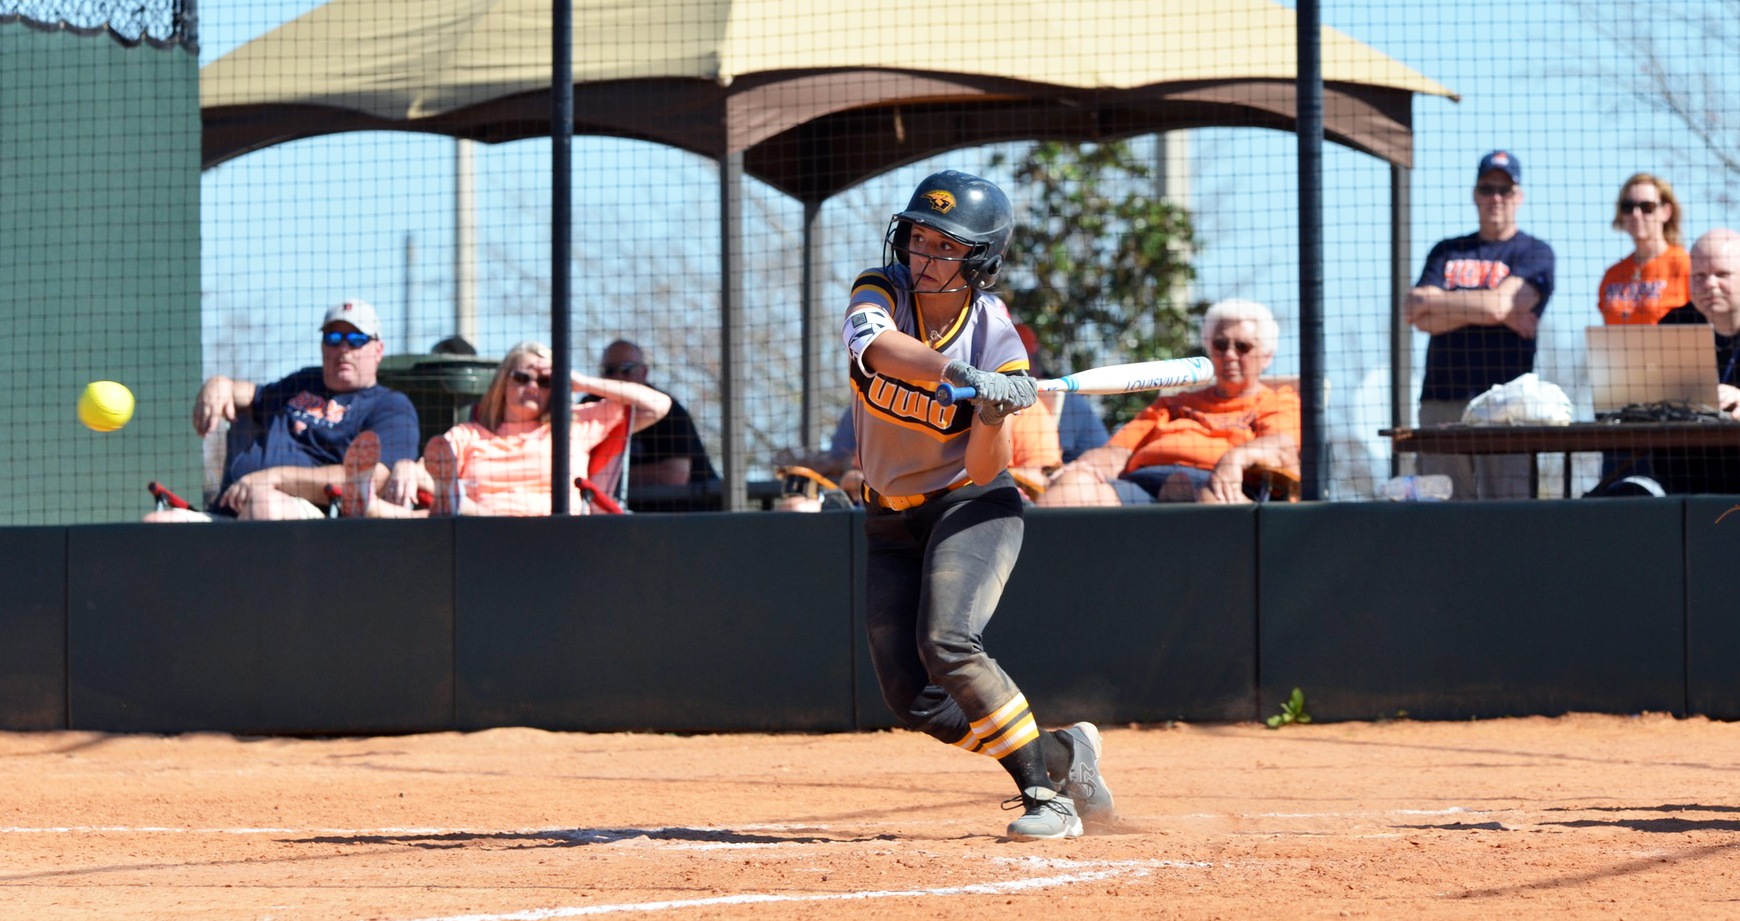 Emma Fionda had two hits and scored twice in the Titans' victory over Hope College.